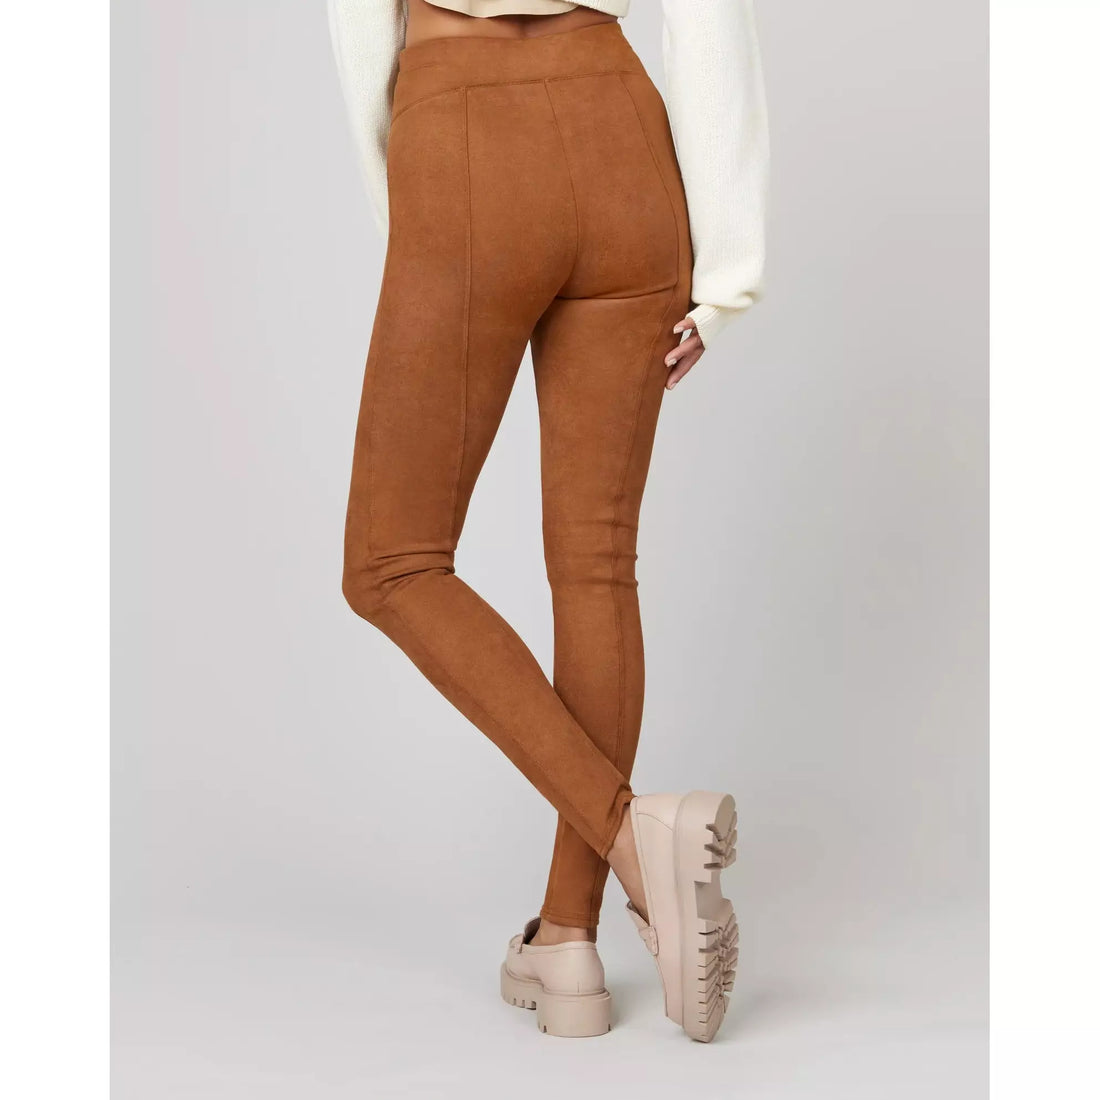 Faux Suede Leggings by Spanx – The G